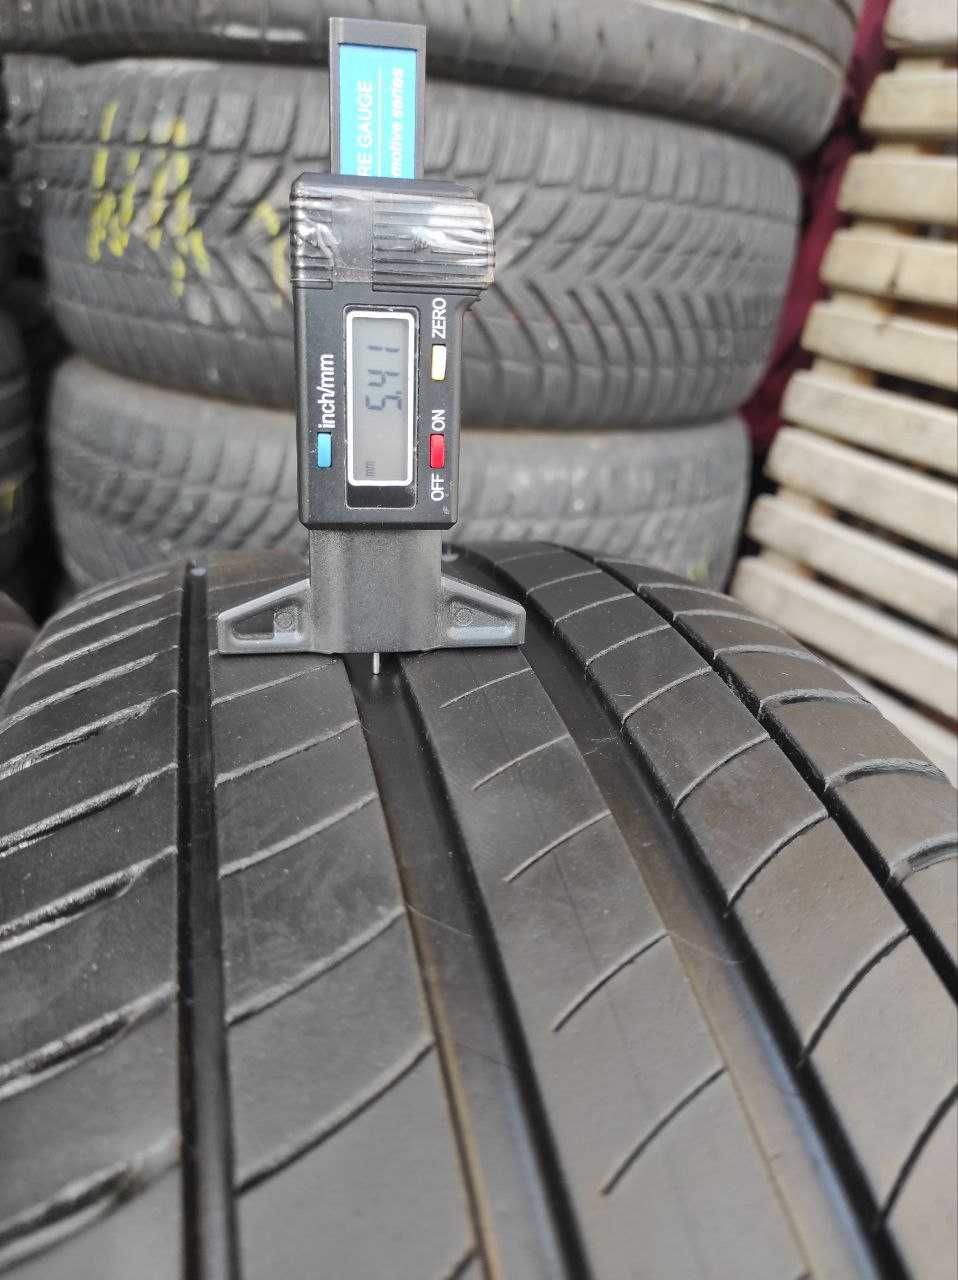 Michelin Primacy 3 205/55r17 made in Germany 4шт, 19год, 5,4мм, ЛЕТО